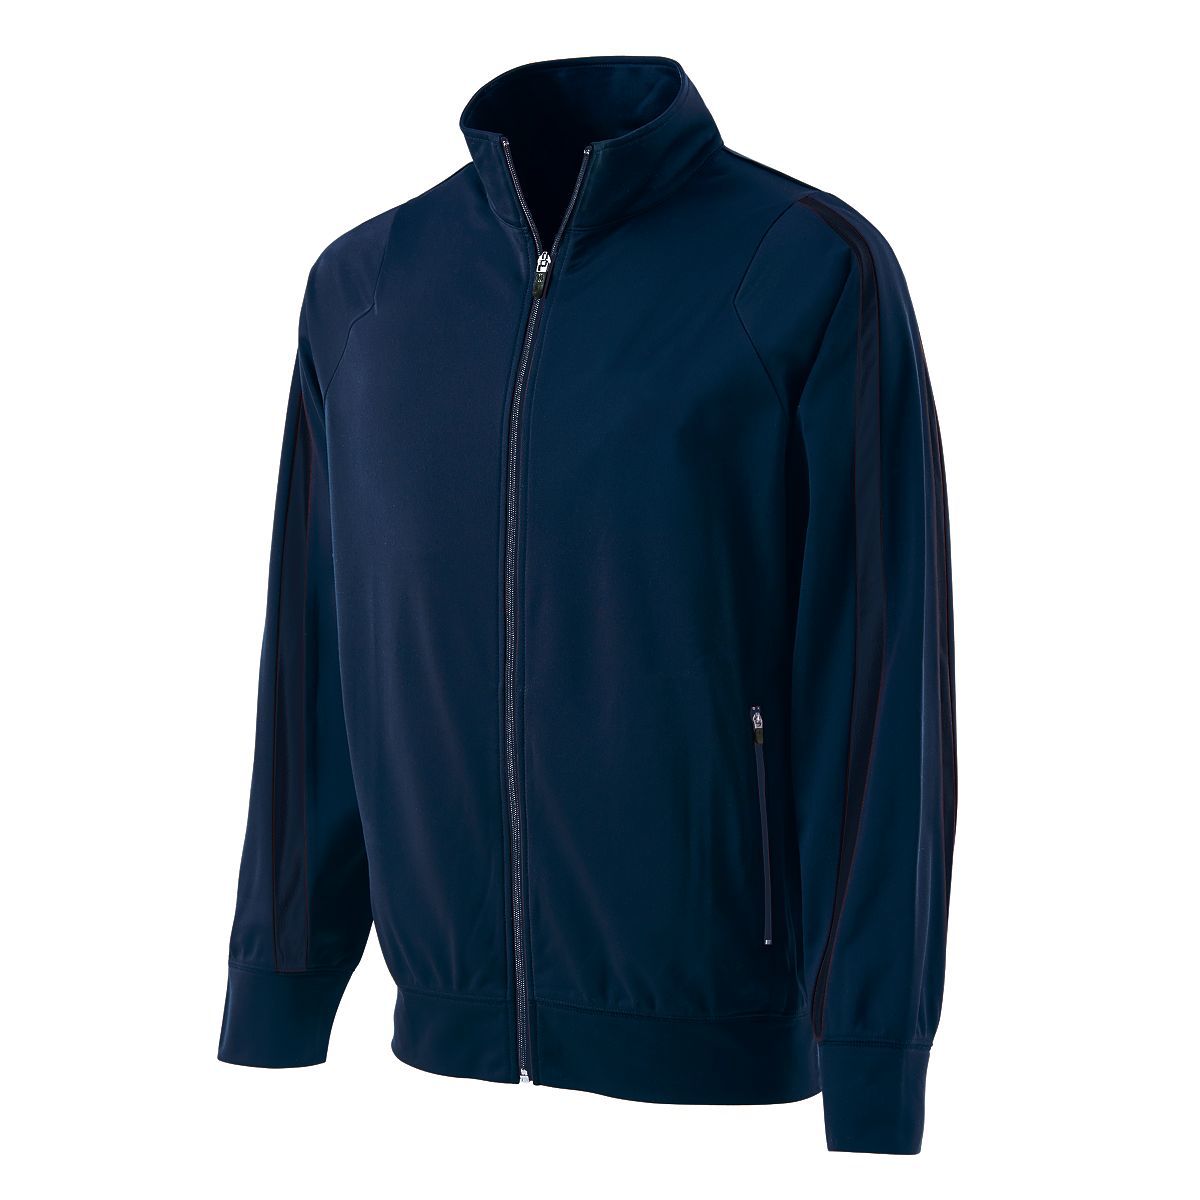 Holloway Determination Jacket in Navy/Navy  -Part of the Adult, Adult-Jacket, Holloway, Outerwear product lines at KanaleyCreations.com